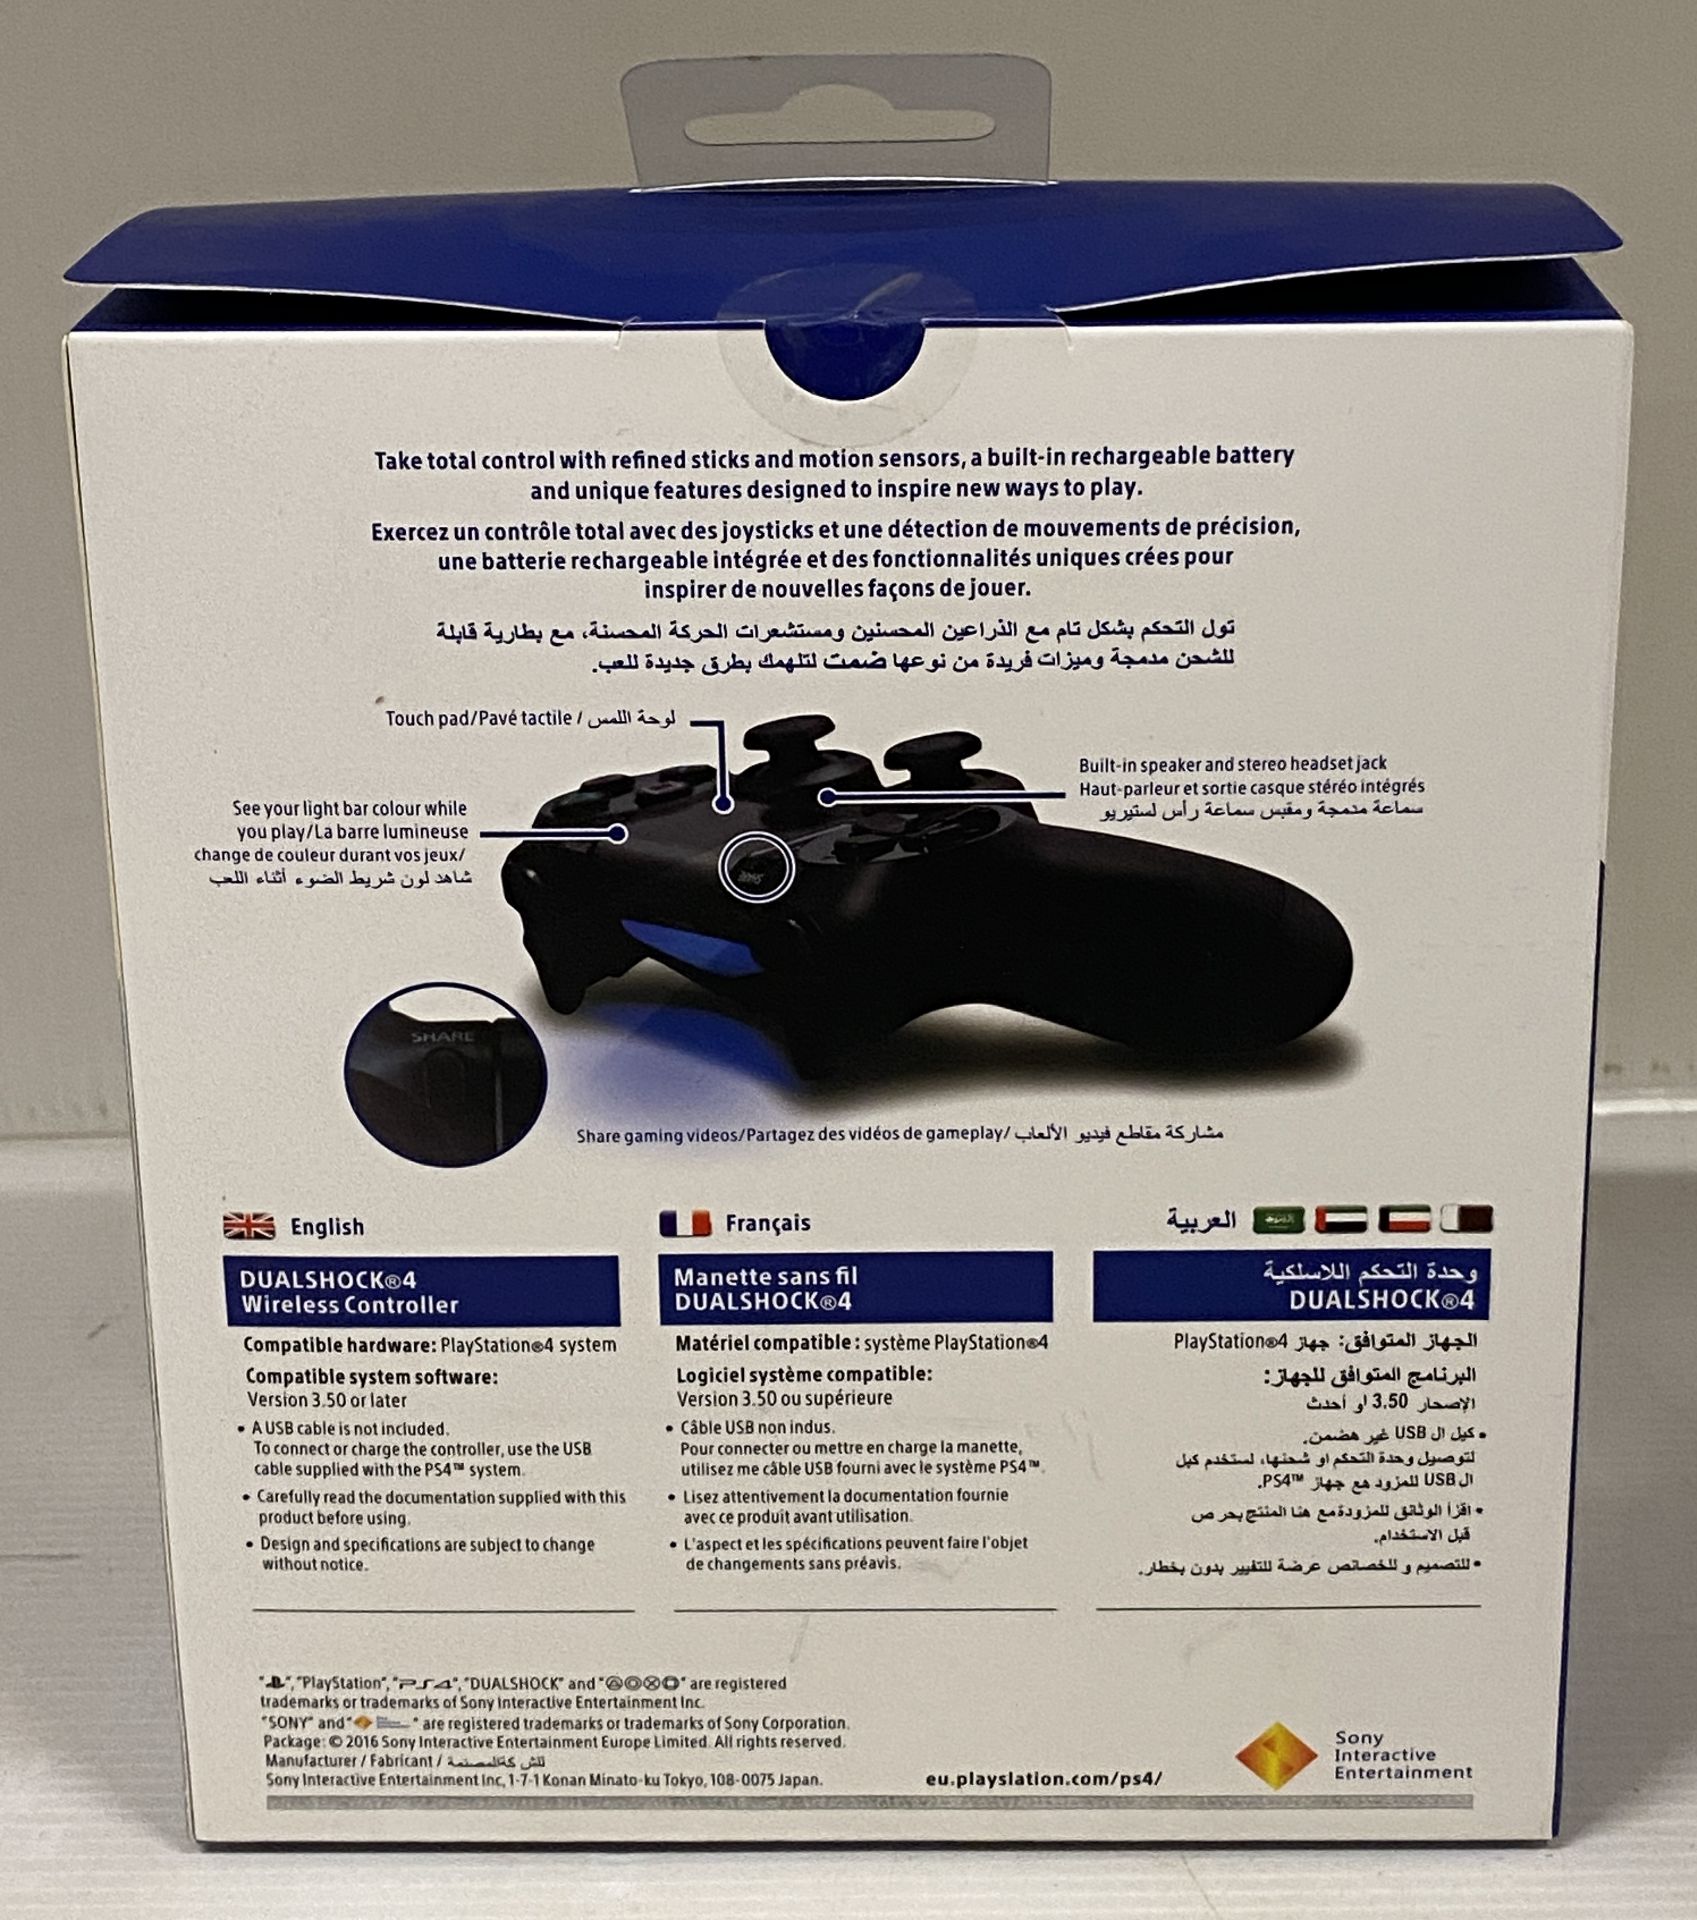 A Sony Playstation Dualshock 4 Wireless Controller - (Saleroom Location F07) - Image 2 of 2